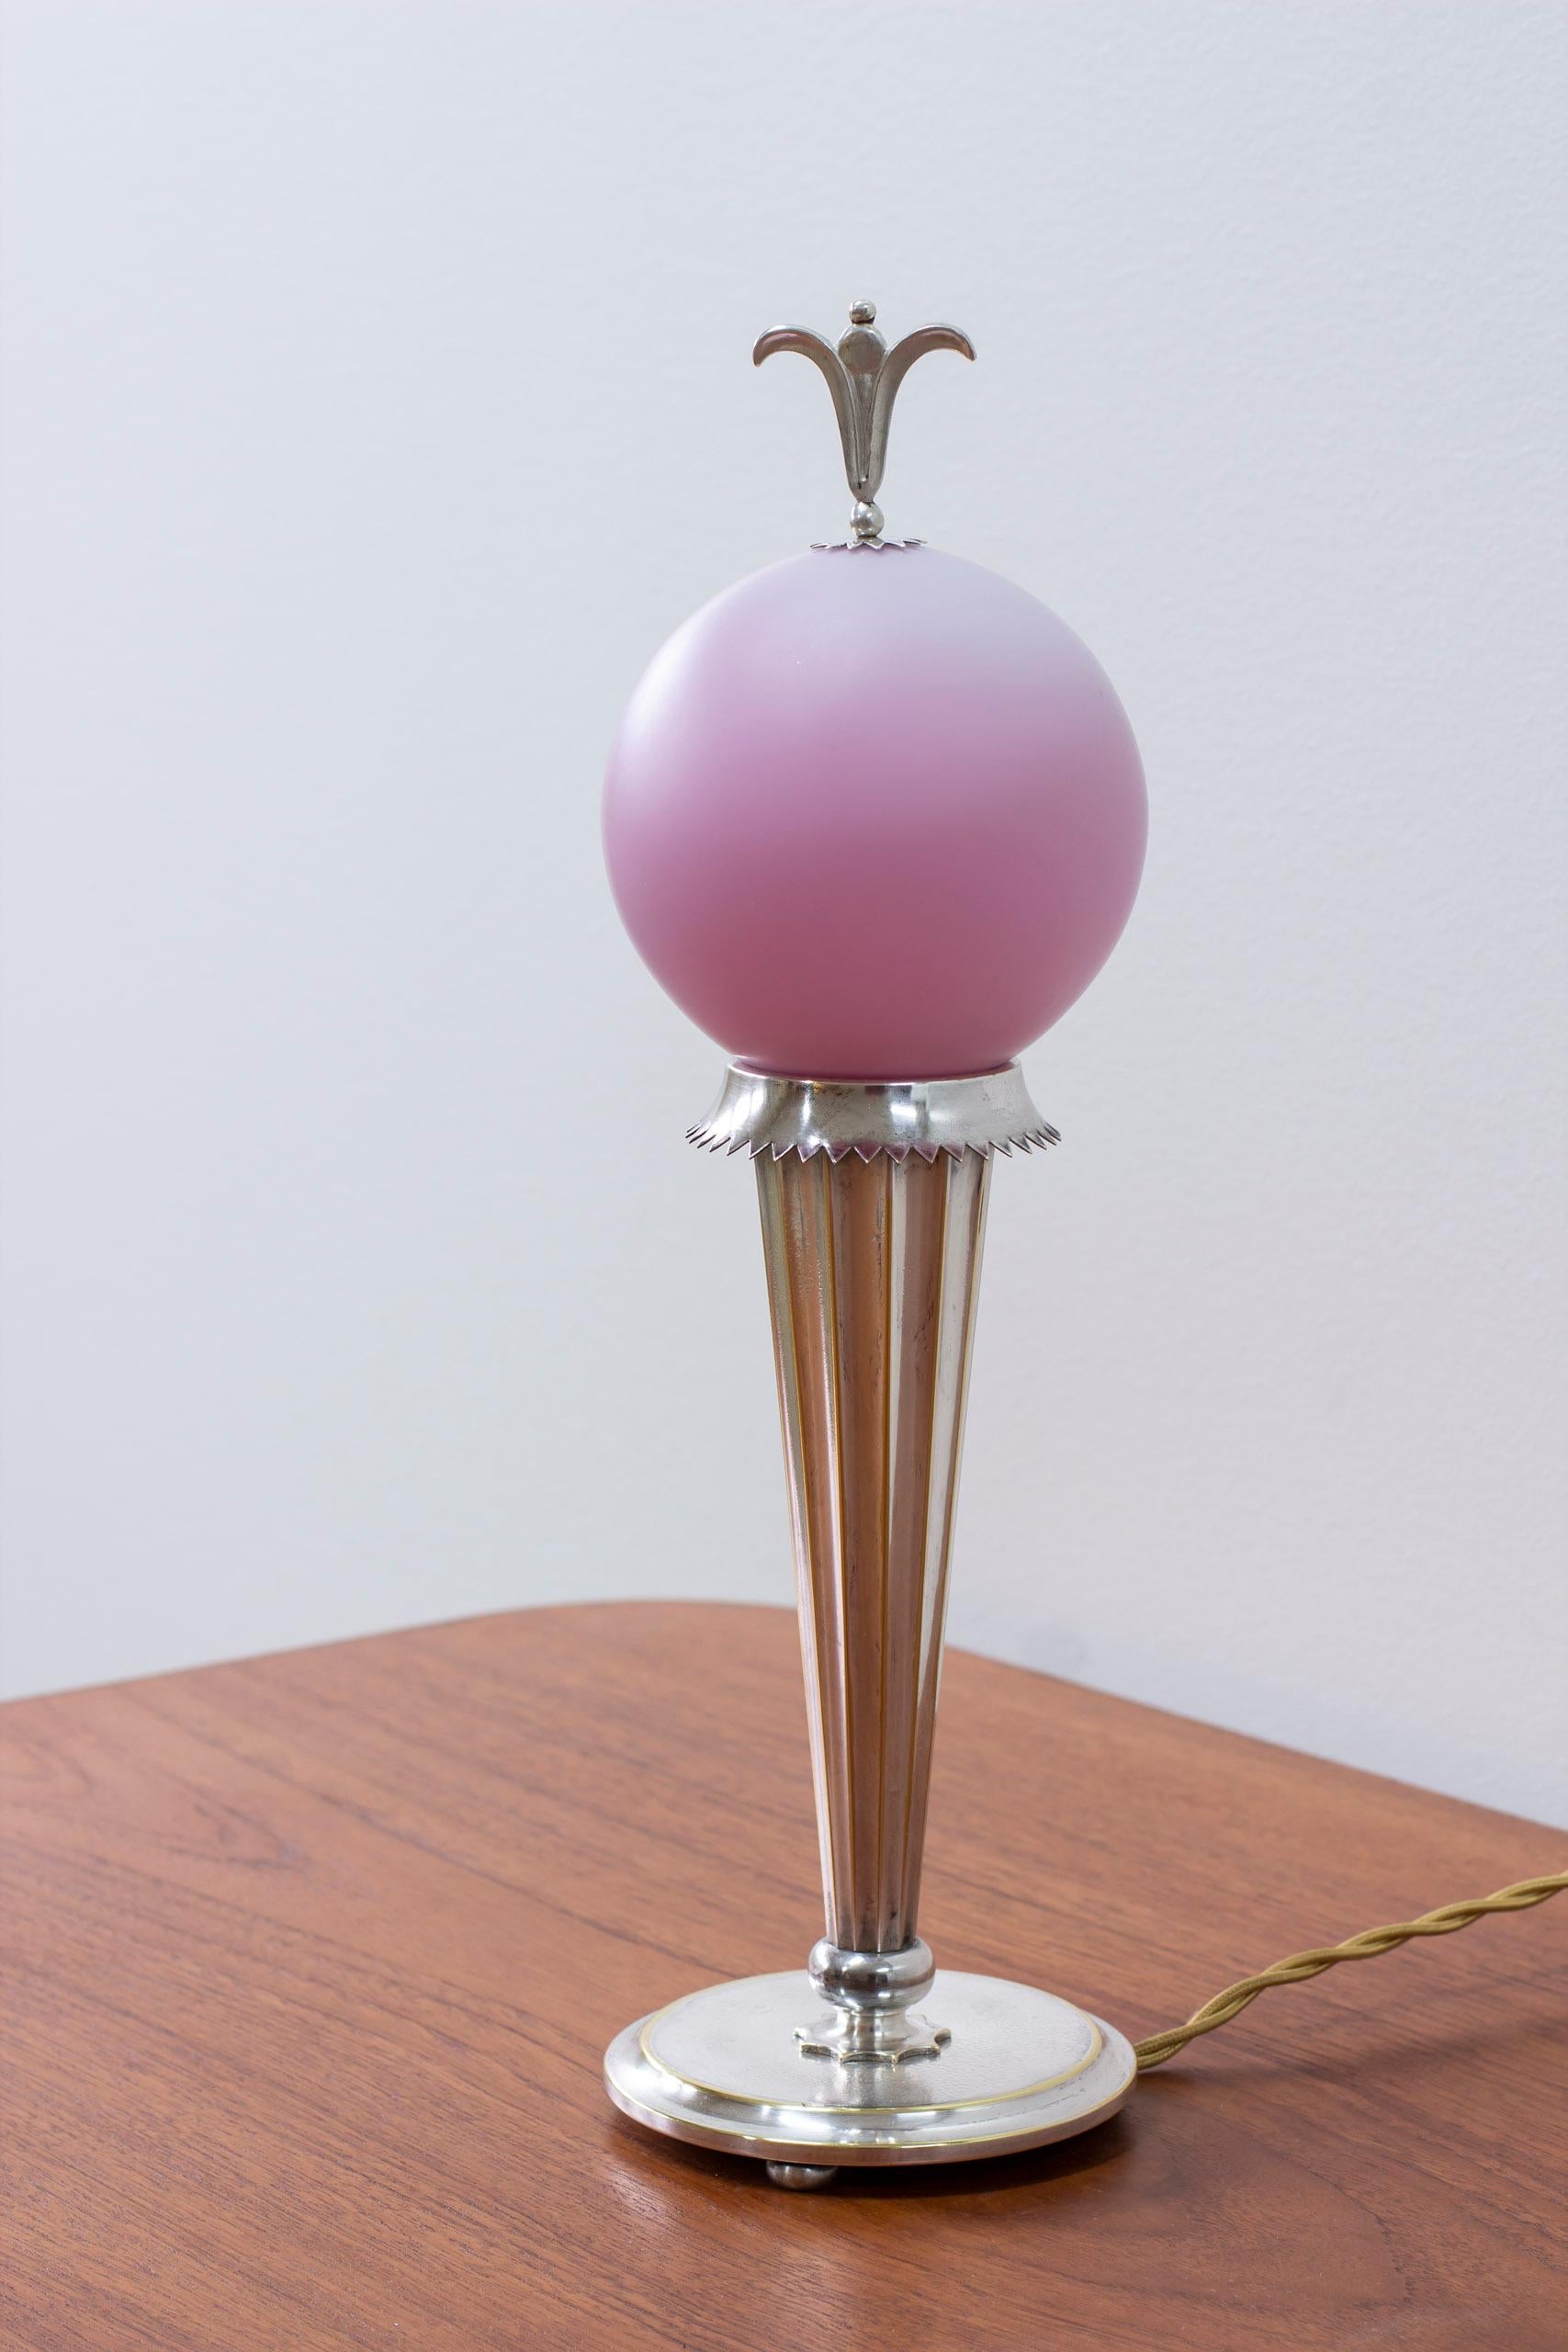 Table lamp 6853 designed by Harald Elof Notini. Produced by Böhlmarks lampfabrik in Stockholm Sweden ca 1924-35. Made from silver plated brass with pink Triplex glass shade with silver plated top decoration. Very good vintage condition with light